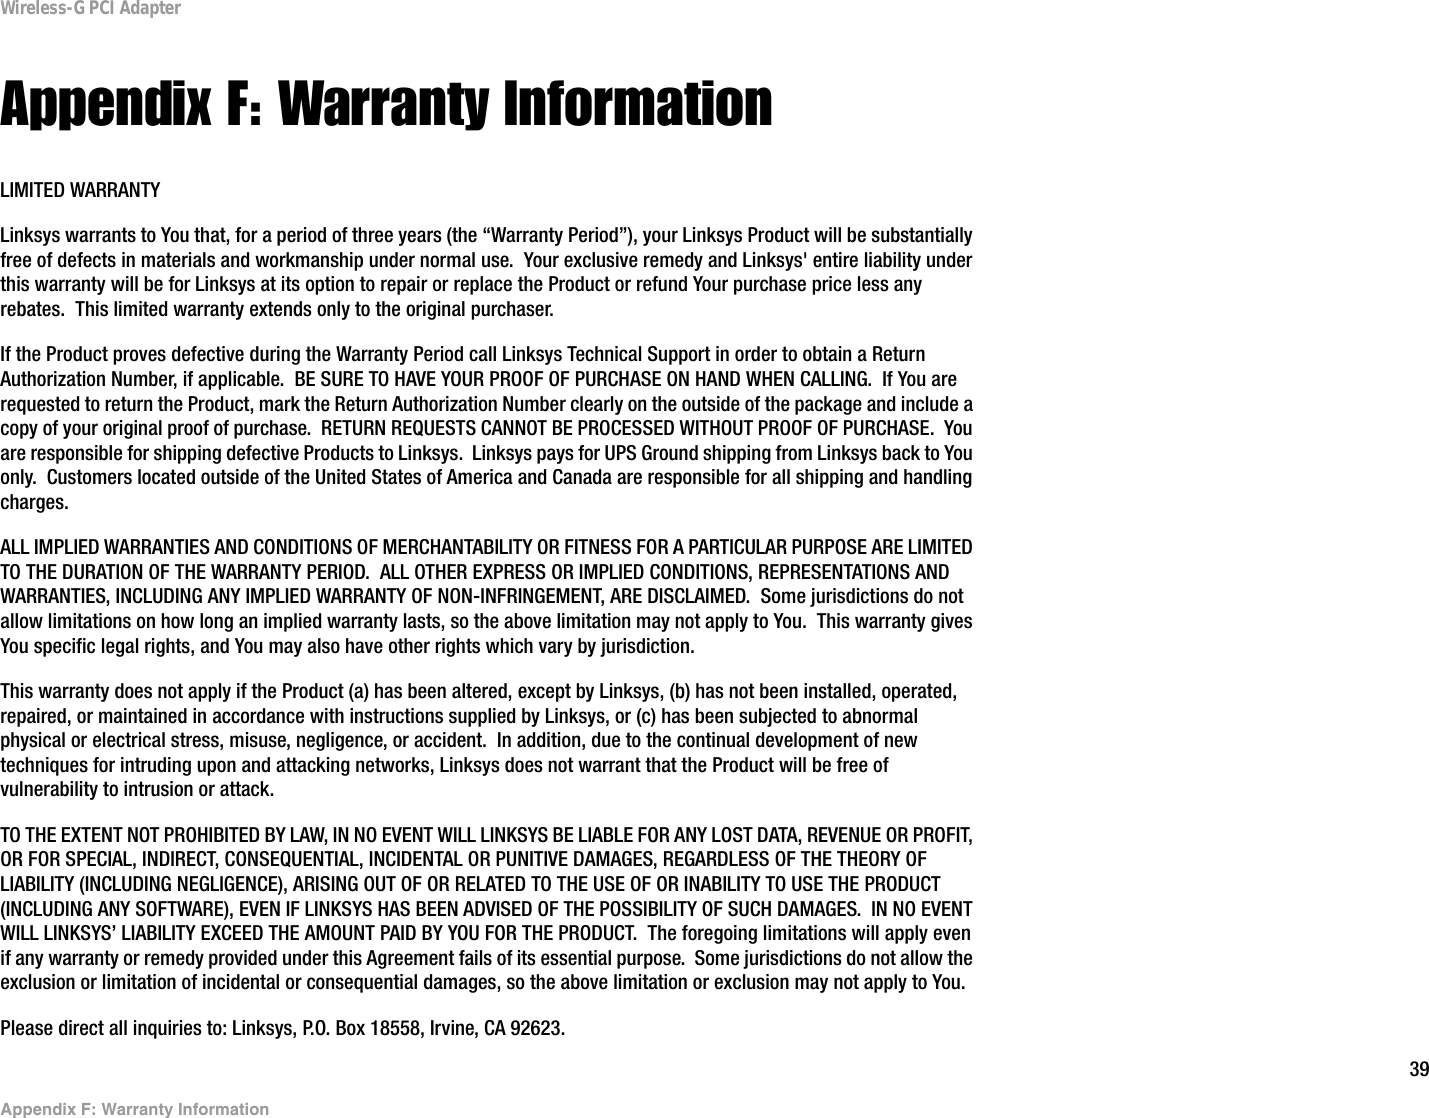 39Appendix F: Warranty InformationWireless-G PCI AdapterAppendix F: Warranty InformationLIMITED WARRANTYLinksys warrants to You that, for a period of three years (the “Warranty Period”), your Linksys Product will be substantially free of defects in materials and workmanship under normal use.  Your exclusive remedy and Linksys&apos; entire liability under this warranty will be for Linksys at its option to repair or replace the Product or refund Your purchase price less any rebates.  This limited warranty extends only to the original purchaser.  If the Product proves defective during the Warranty Period call Linksys Technical Support in order to obtain a Return Authorization Number, if applicable.  BE SURE TO HAVE YOUR PROOF OF PURCHASE ON HAND WHEN CALLING.  If You are requested to return the Product, mark the Return Authorization Number clearly on the outside of the package and include a copy of your original proof of purchase.  RETURN REQUESTS CANNOT BE PROCESSED WITHOUT PROOF OF PURCHASE.  You are responsible for shipping defective Products to Linksys.  Linksys pays for UPS Ground shipping from Linksys back to You only.  Customers located outside of the United States of America and Canada are responsible for all shipping and handling charges. ALL IMPLIED WARRANTIES AND CONDITIONS OF MERCHANTABILITY OR FITNESS FOR A PARTICULAR PURPOSE ARE LIMITED TO THE DURATION OF THE WARRANTY PERIOD.  ALL OTHER EXPRESS OR IMPLIED CONDITIONS, REPRESENTATIONS AND WARRANTIES, INCLUDING ANY IMPLIED WARRANTY OF NON-INFRINGEMENT, ARE DISCLAIMED.  Some jurisdictions do not allow limitations on how long an implied warranty lasts, so the above limitation may not apply to You.  This warranty gives You specific legal rights, and You may also have other rights which vary by jurisdiction.This warranty does not apply if the Product (a) has been altered, except by Linksys, (b) has not been installed, operated, repaired, or maintained in accordance with instructions supplied by Linksys, or (c) has been subjected to abnormal physical or electrical stress, misuse, negligence, or accident.  In addition, due to the continual development of new techniques for intruding upon and attacking networks, Linksys does not warrant that the Product will be free of vulnerability to intrusion or attack.TO THE EXTENT NOT PROHIBITED BY LAW, IN NO EVENT WILL LINKSYS BE LIABLE FOR ANY LOST DATA, REVENUE OR PROFIT, OR FOR SPECIAL, INDIRECT, CONSEQUENTIAL, INCIDENTAL OR PUNITIVE DAMAGES, REGARDLESS OF THE THEORY OF LIABILITY (INCLUDING NEGLIGENCE), ARISING OUT OF OR RELATED TO THE USE OF OR INABILITY TO USE THE PRODUCT (INCLUDING ANY SOFTWARE), EVEN IF LINKSYS HAS BEEN ADVISED OF THE POSSIBILITY OF SUCH DAMAGES.  IN NO EVENT WILL LINKSYS’ LIABILITY EXCEED THE AMOUNT PAID BY YOU FOR THE PRODUCT.  The foregoing limitations will apply even if any warranty or remedy provided under this Agreement fails of its essential purpose.  Some jurisdictions do not allow the exclusion or limitation of incidental or consequential damages, so the above limitation or exclusion may not apply to You.Please direct all inquiries to: Linksys, P.O. Box 18558, Irvine, CA 92623.